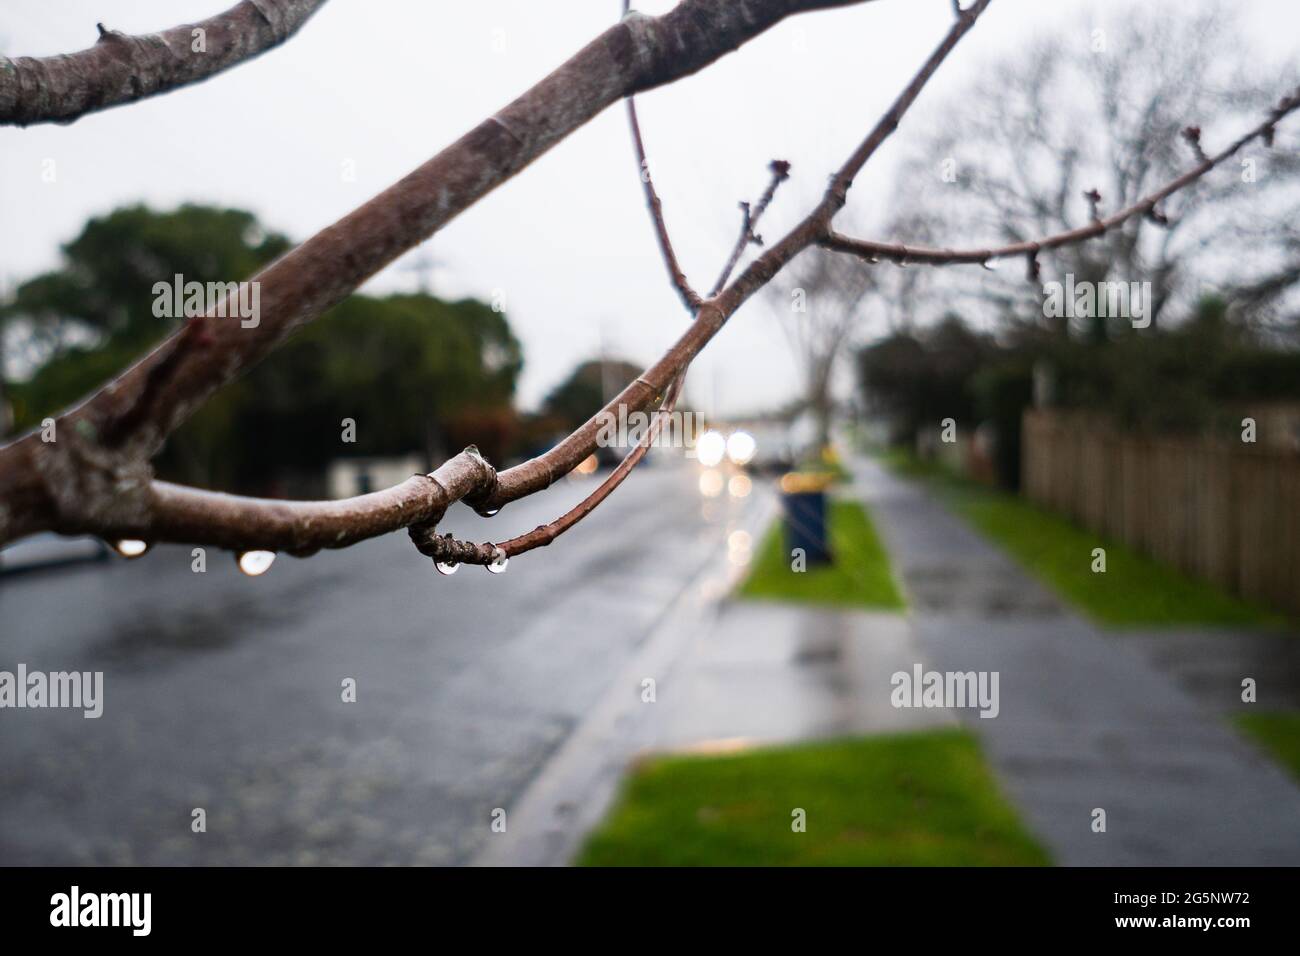 Raindrops on tree branches on a rainy day, car with headlights on approaching from an urban street. Shallow depth of field. Stock Photo